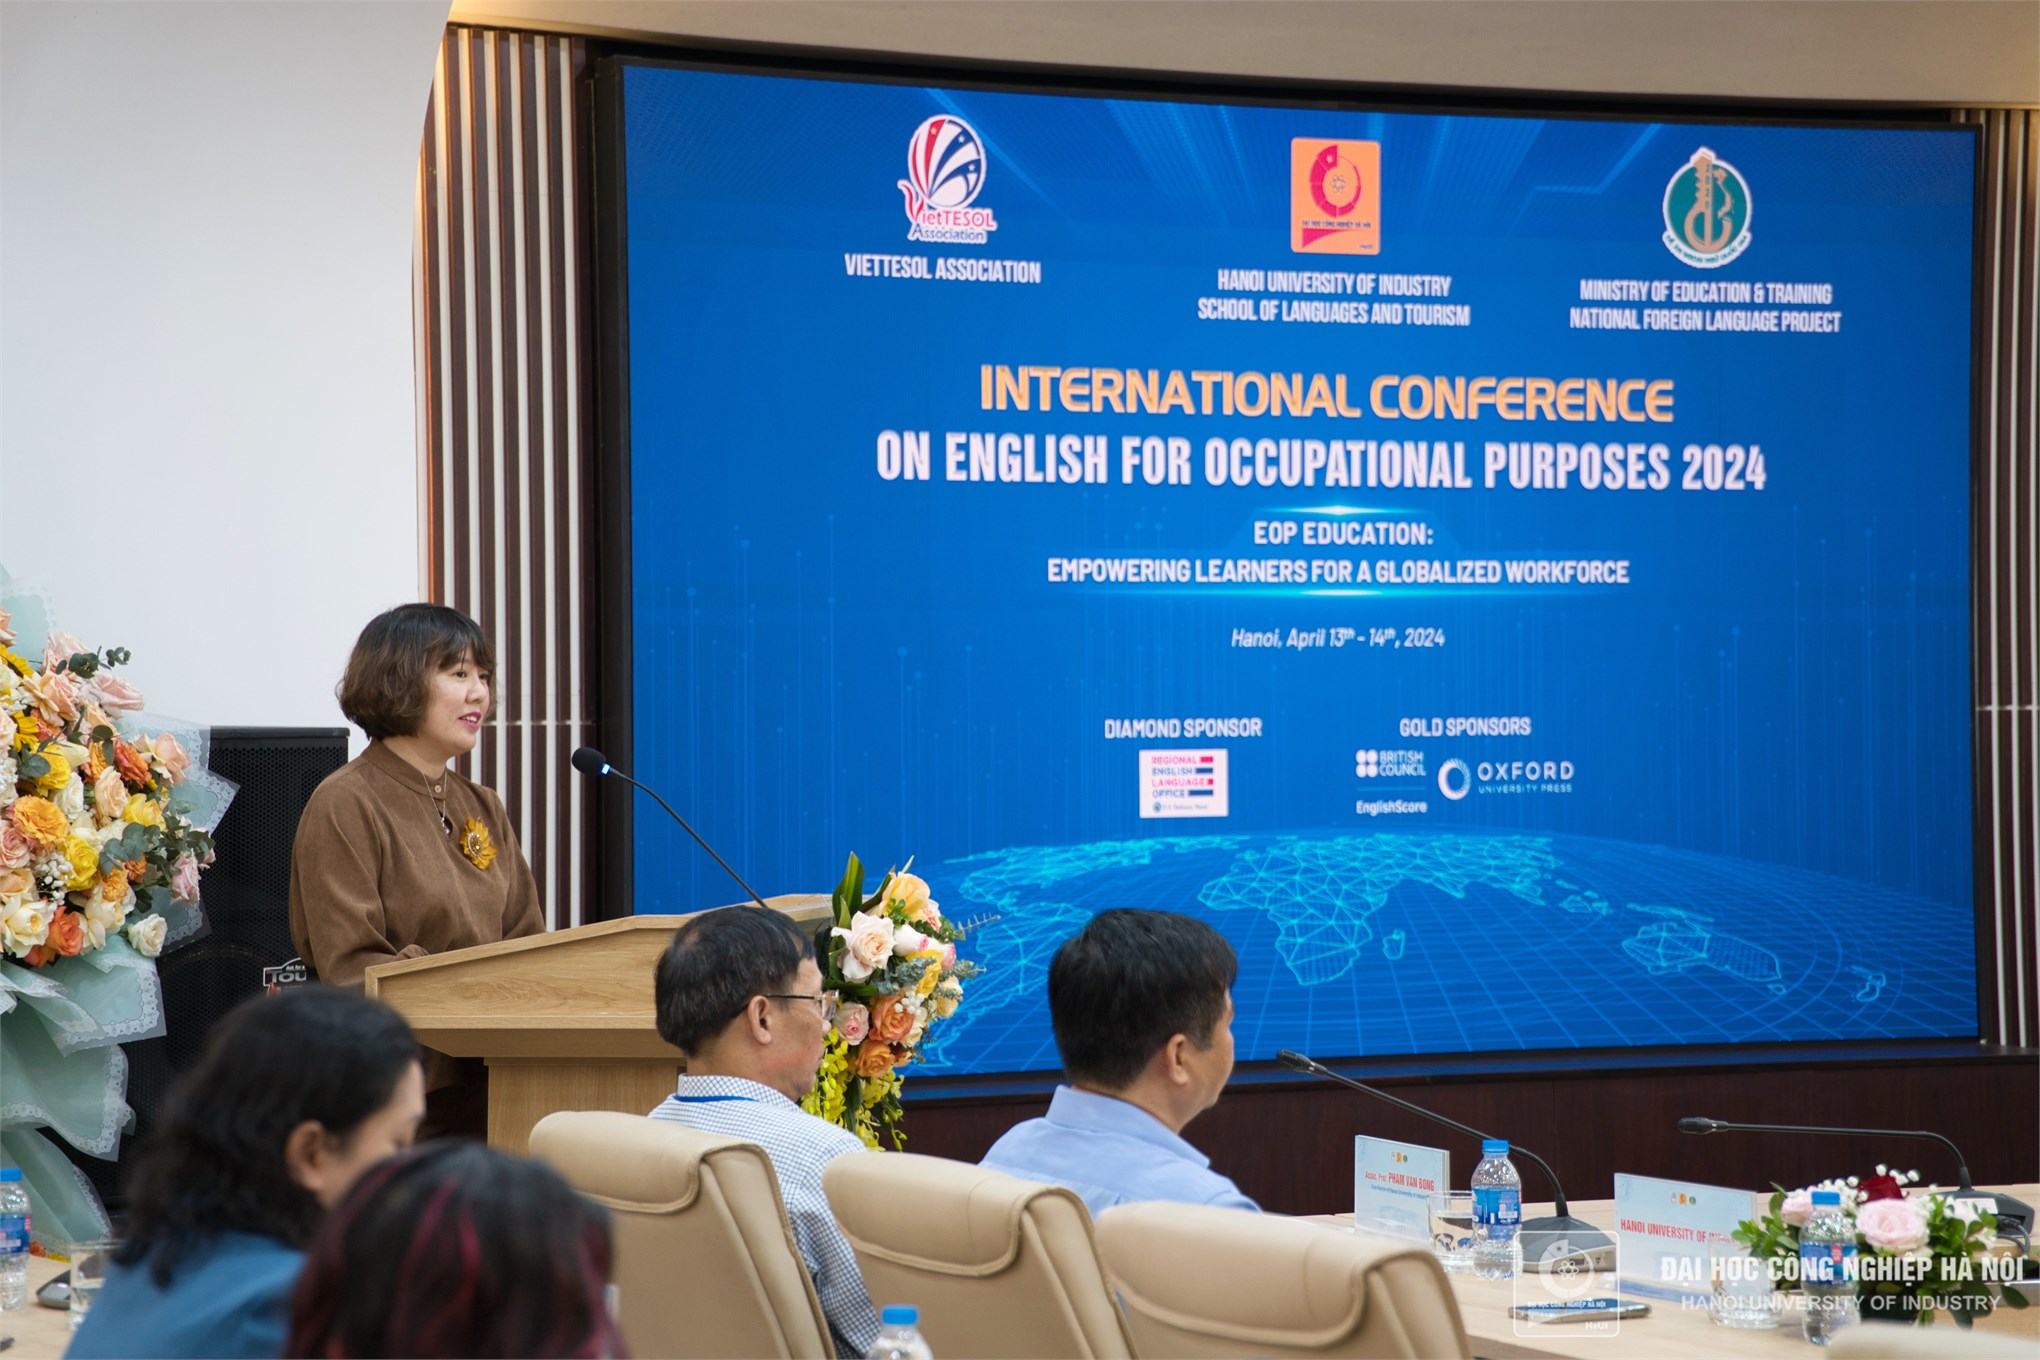 International Conference on English for Occupational Purposes 2024: EOP Education - Empowering Learners for a Globalized Workforce